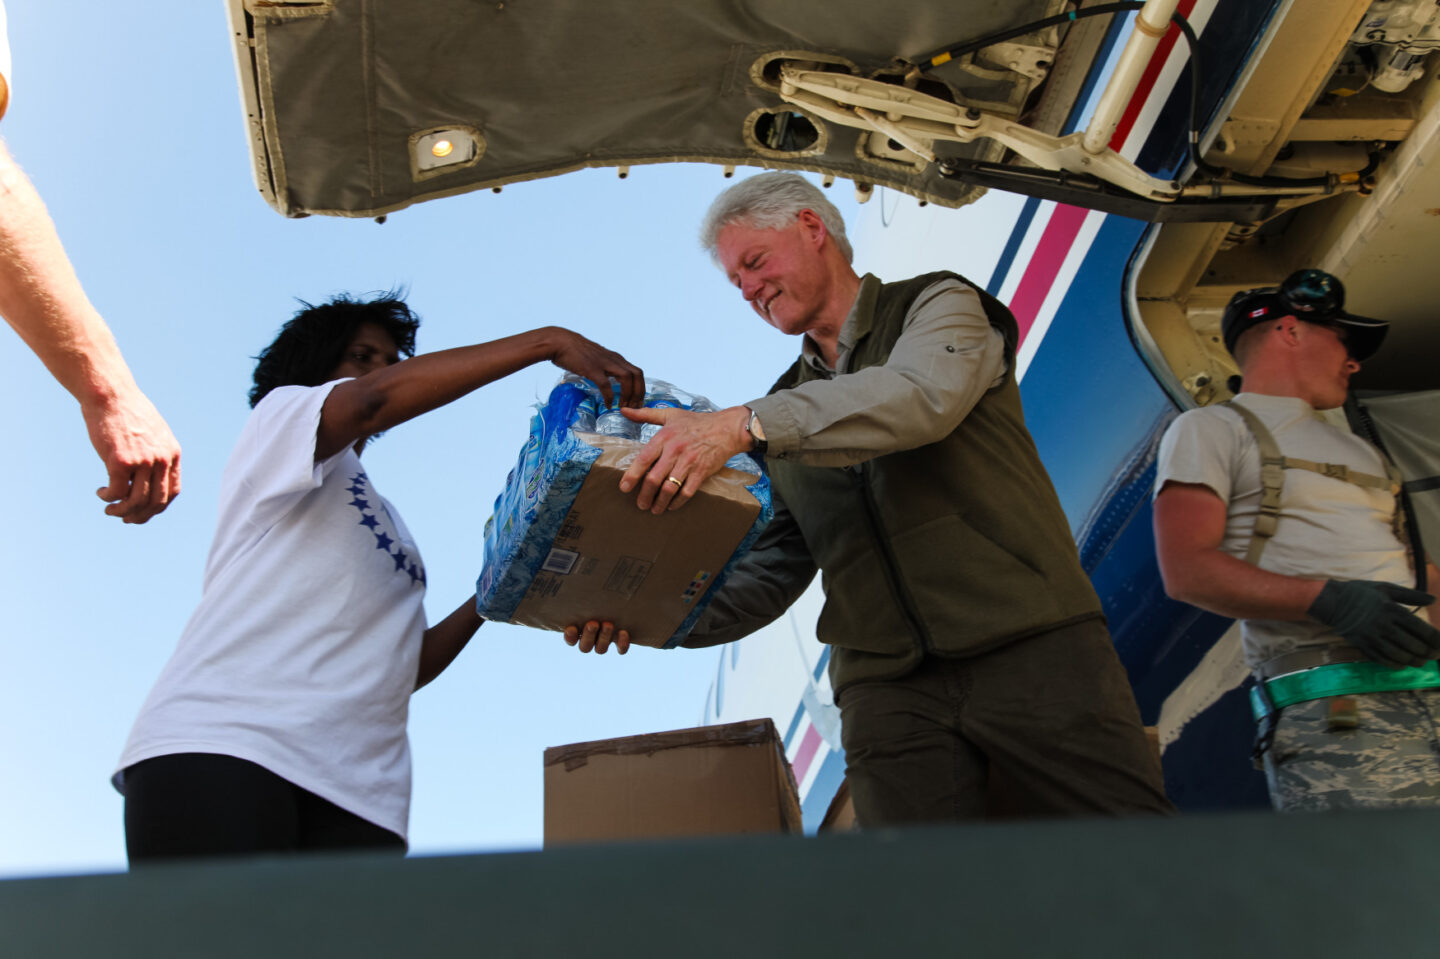 President Clinton and several individuals unload bottles of water from a plane